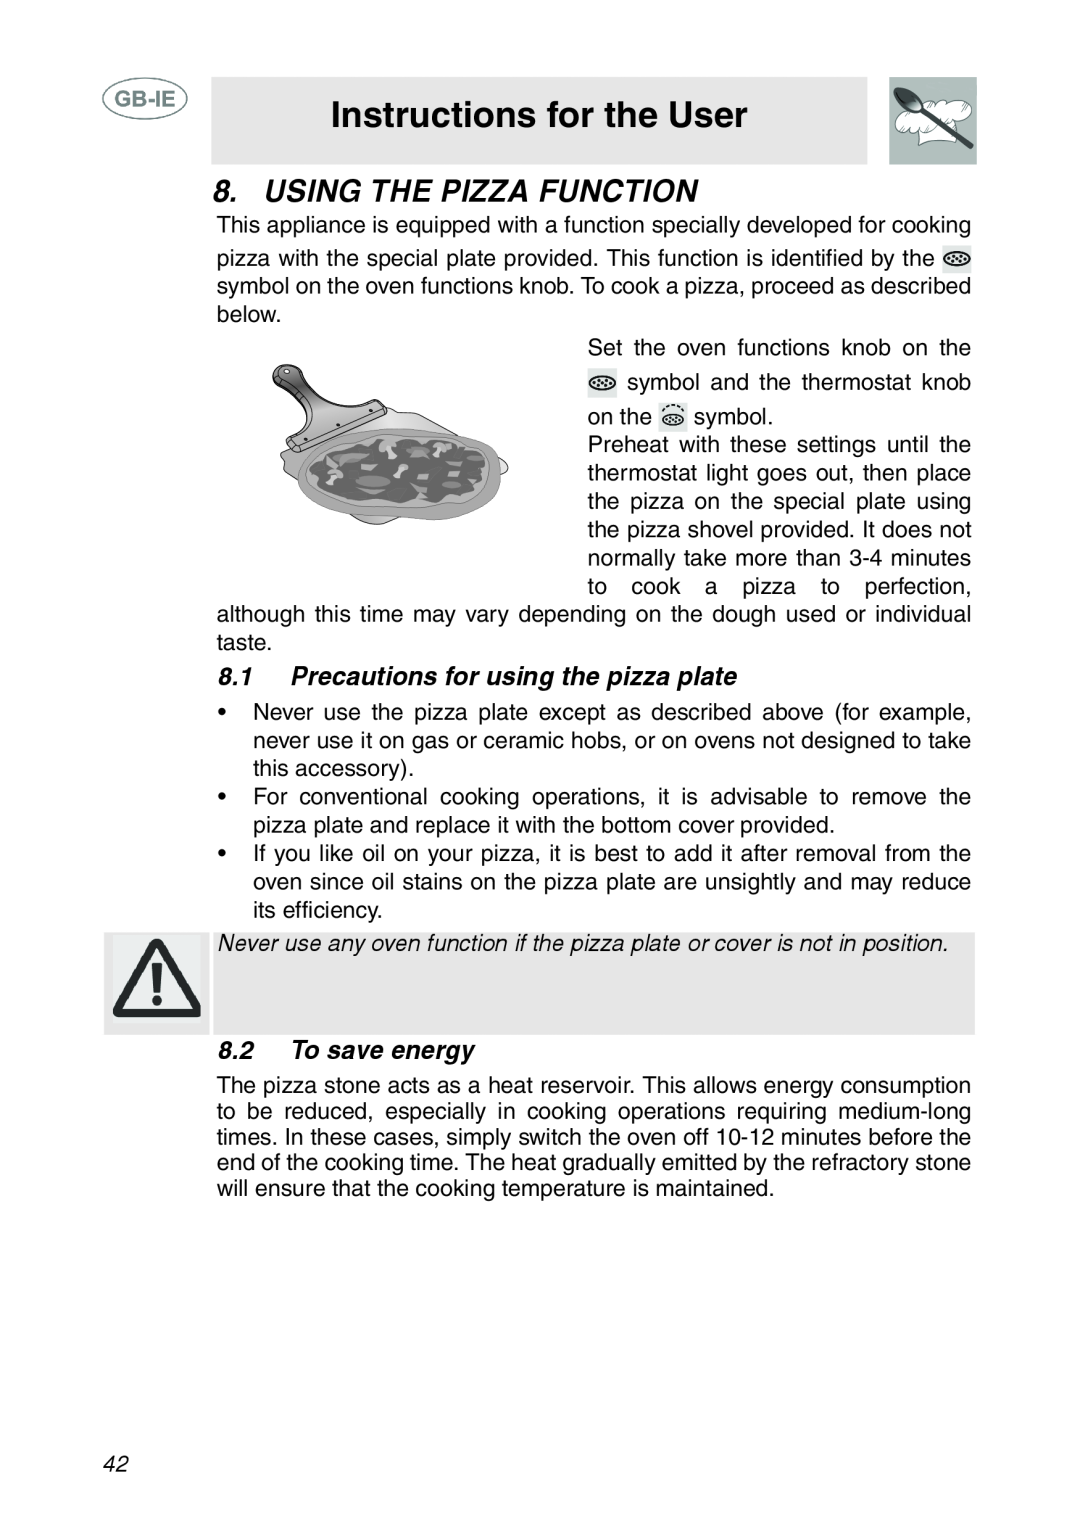 Smeg SE995XT-7 Using The Pizza Function, Instructions for the User, Precautions for using the pizza plate, To save energy 